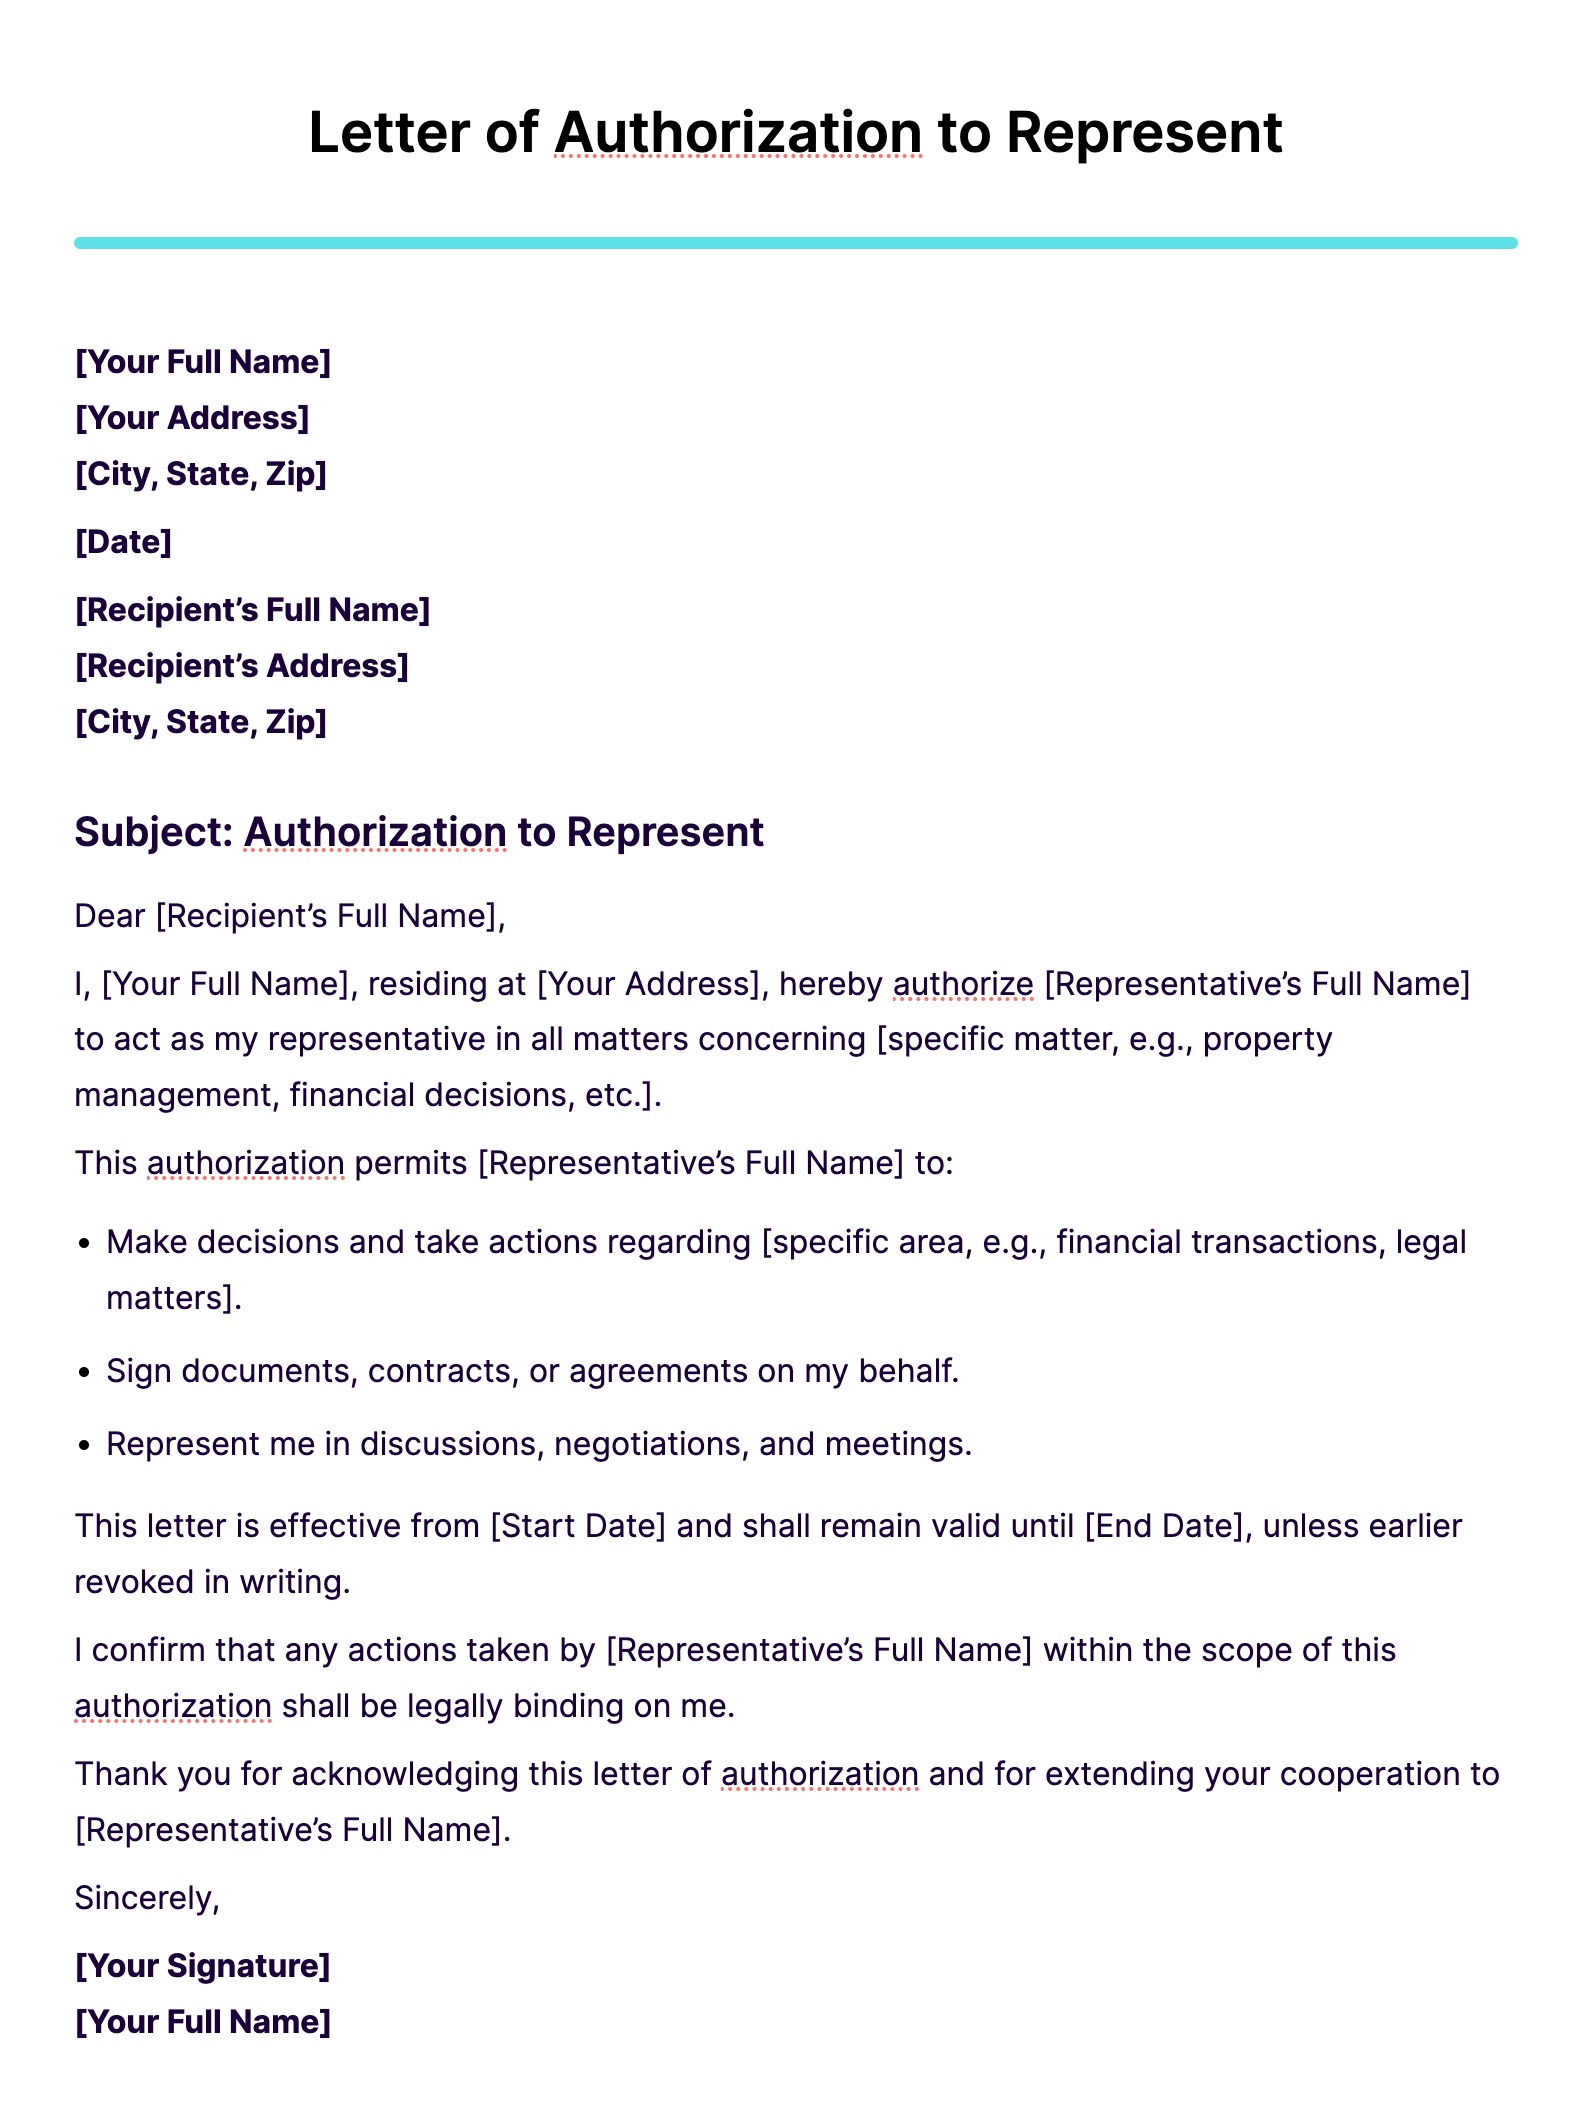 Letter of Authorization to Represent - 12+ Examples, Format, Sample ...